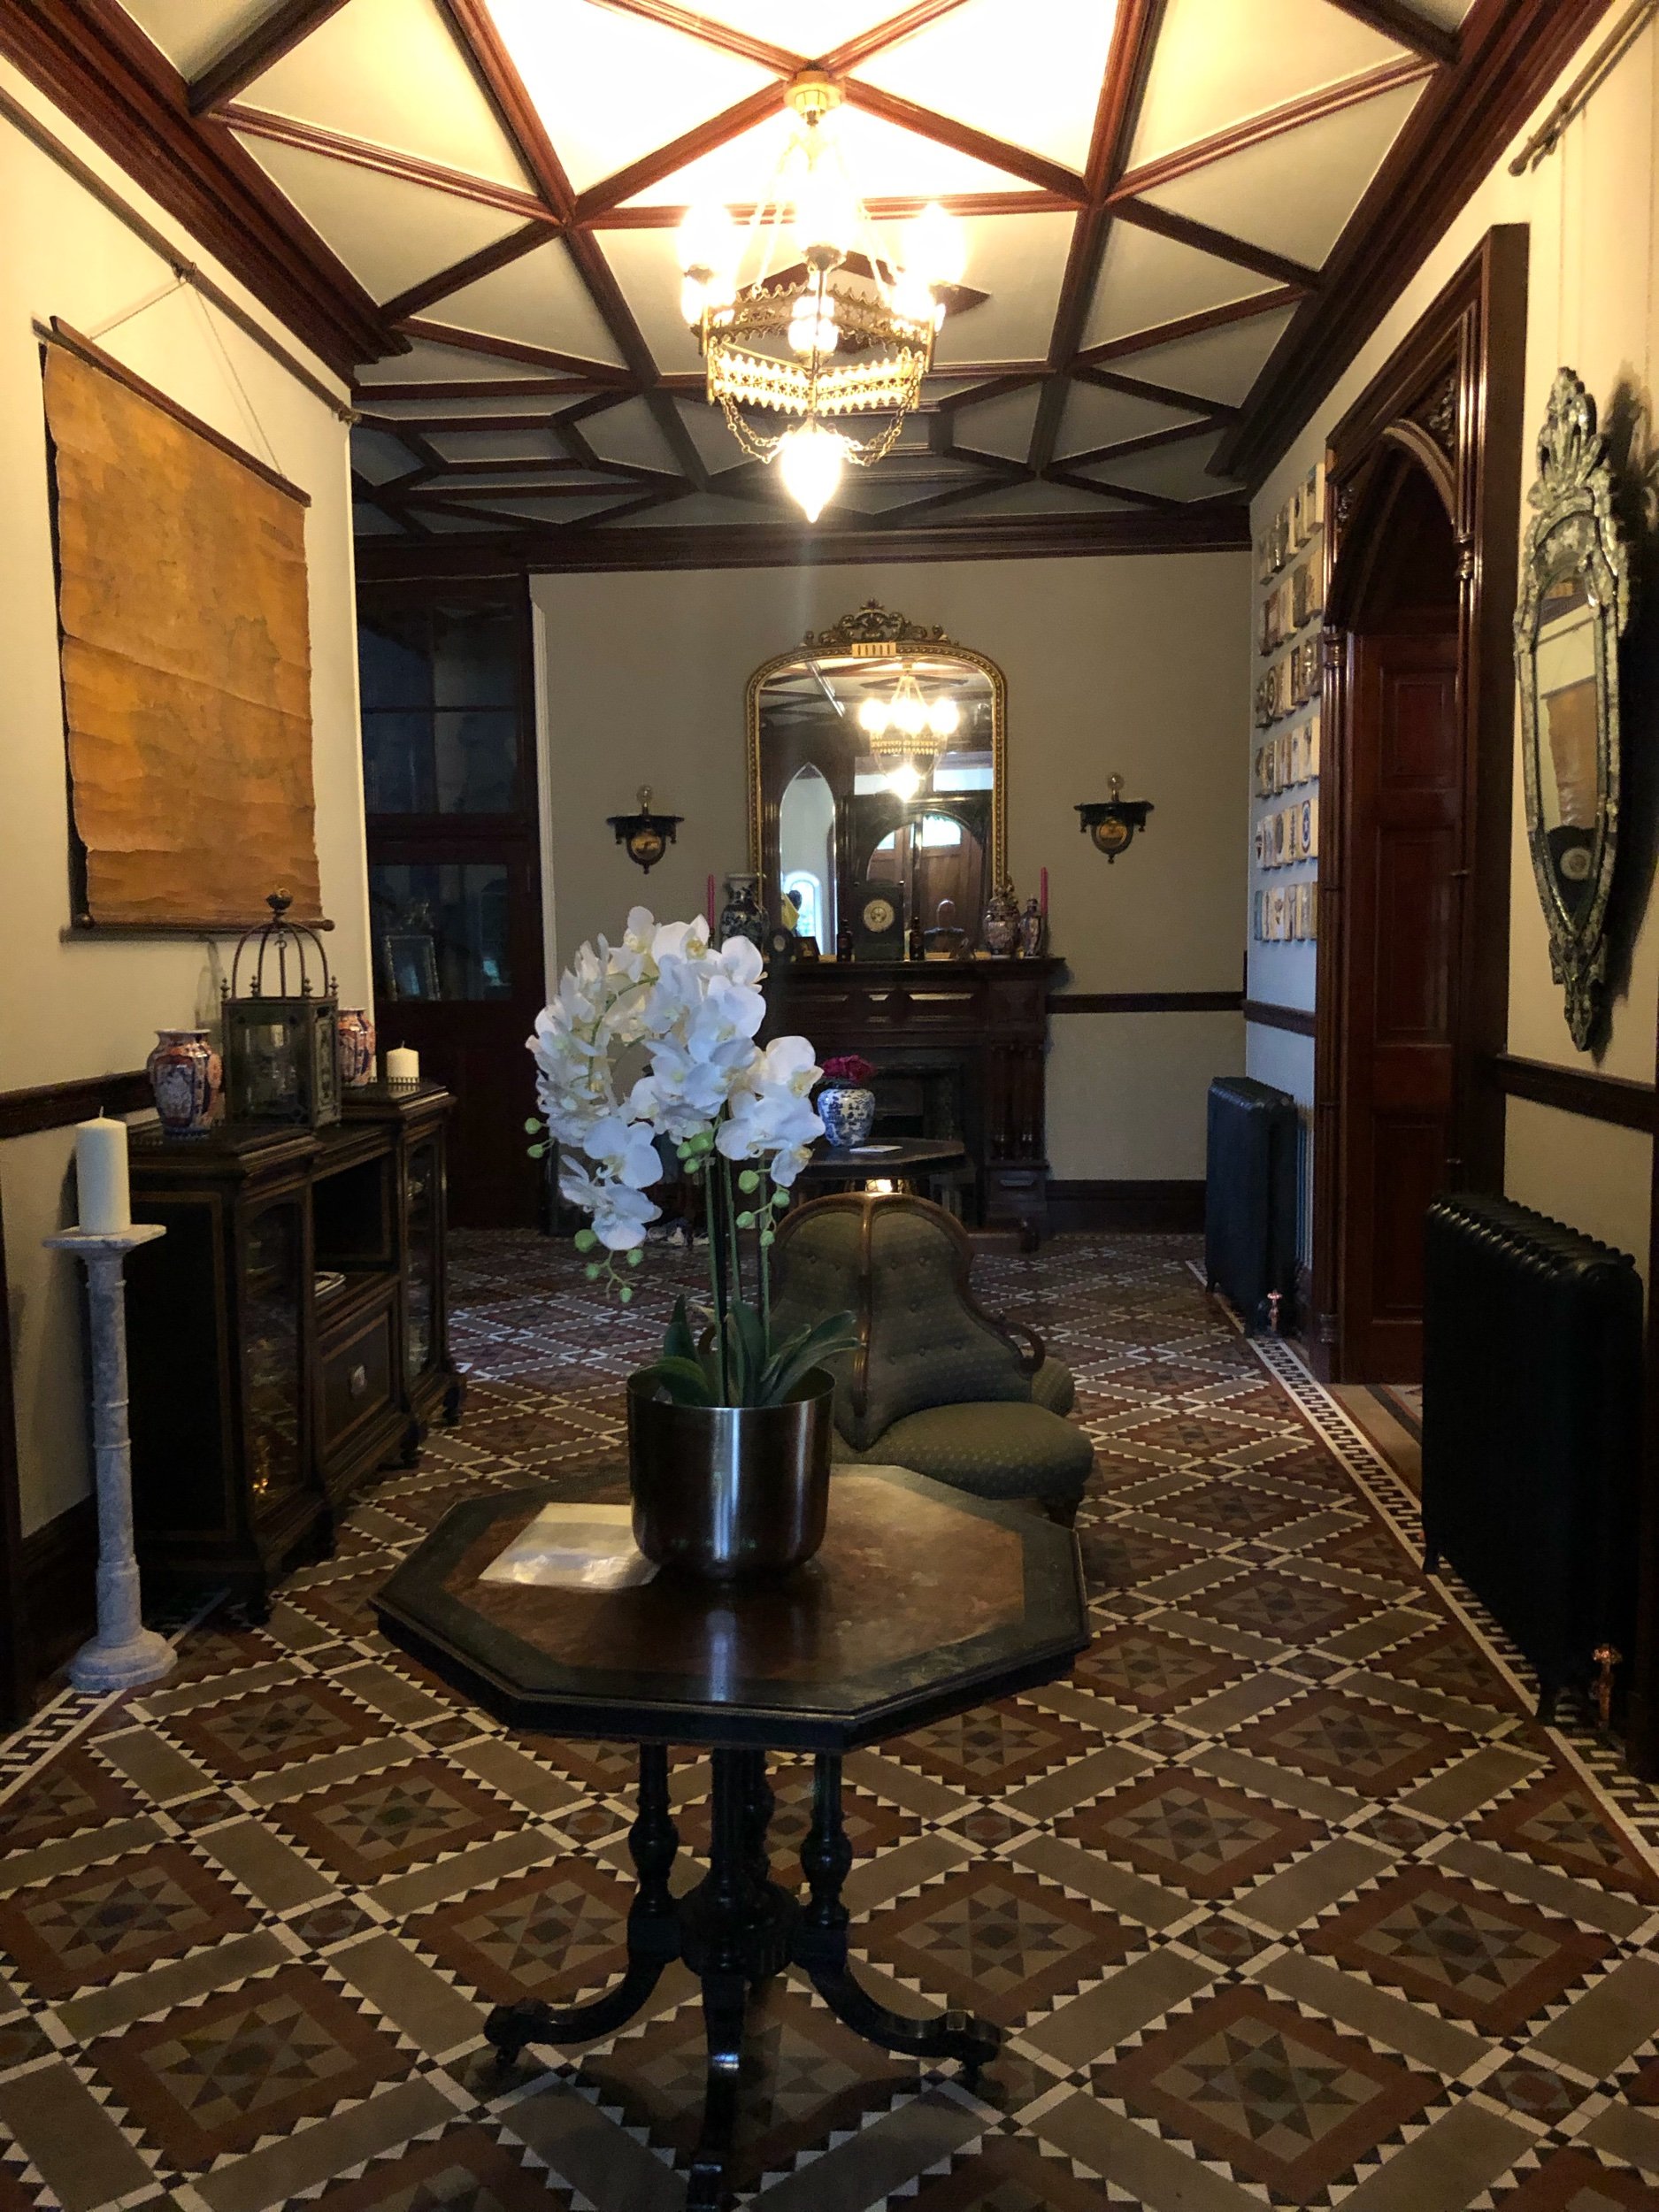  The front hall off the main entrance. The stone tile floor is just spectacular, and the carved wood door frames are beautiful. 